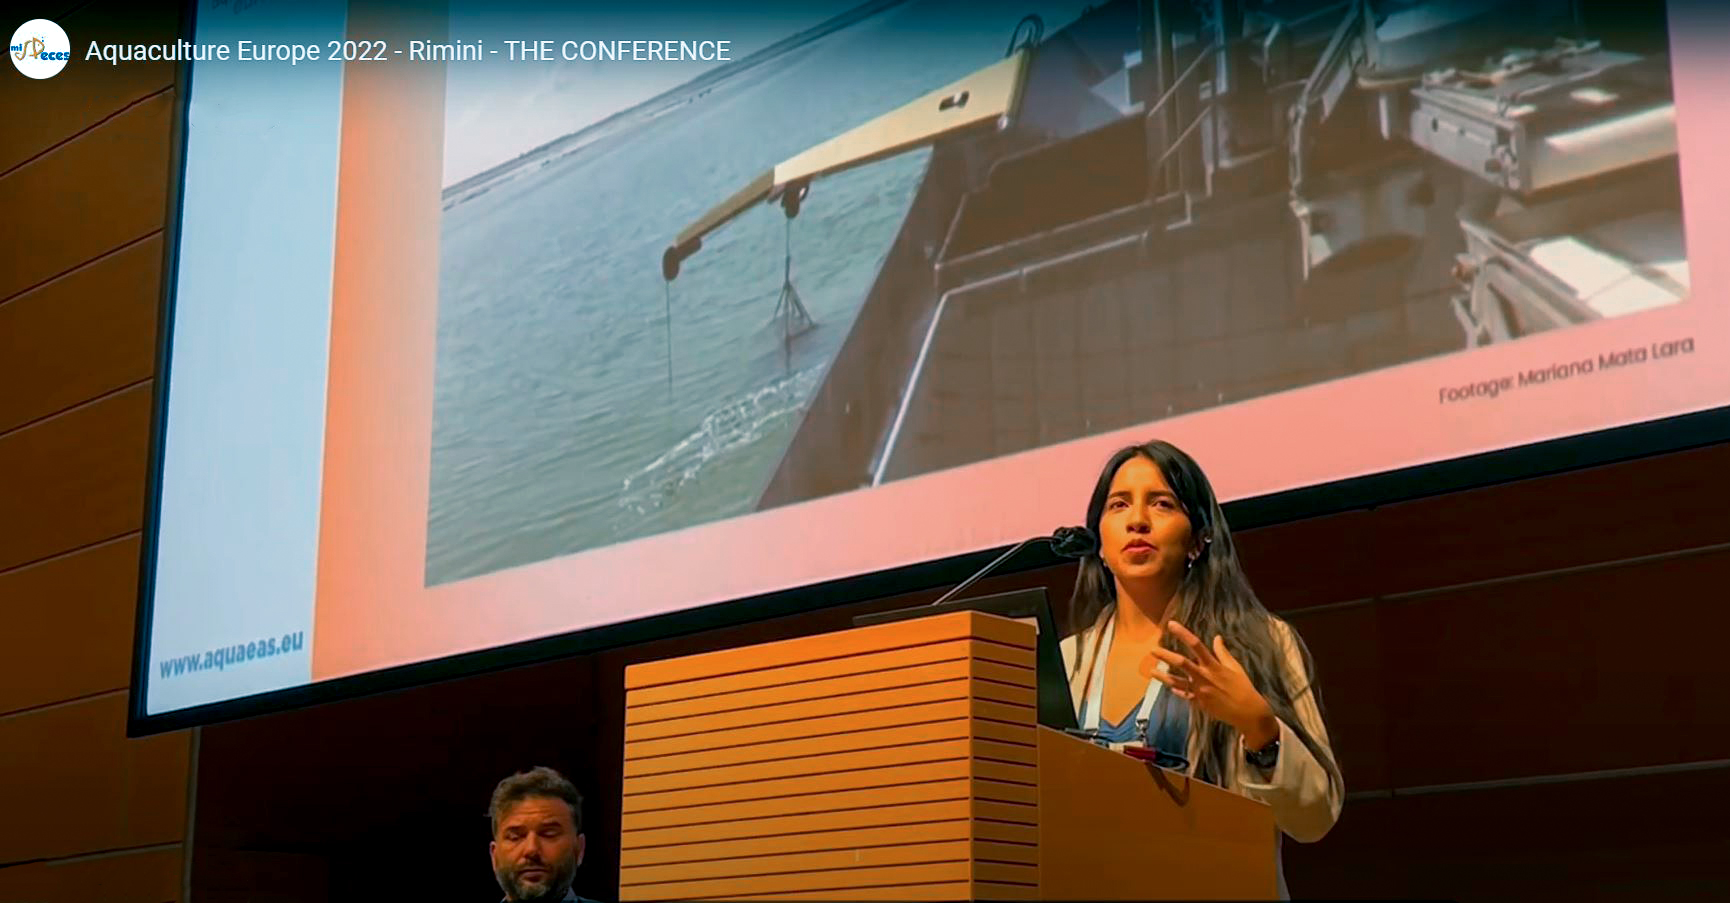 Geonardo opened the Aquaculture Europe Conference with the first Plenary Session 